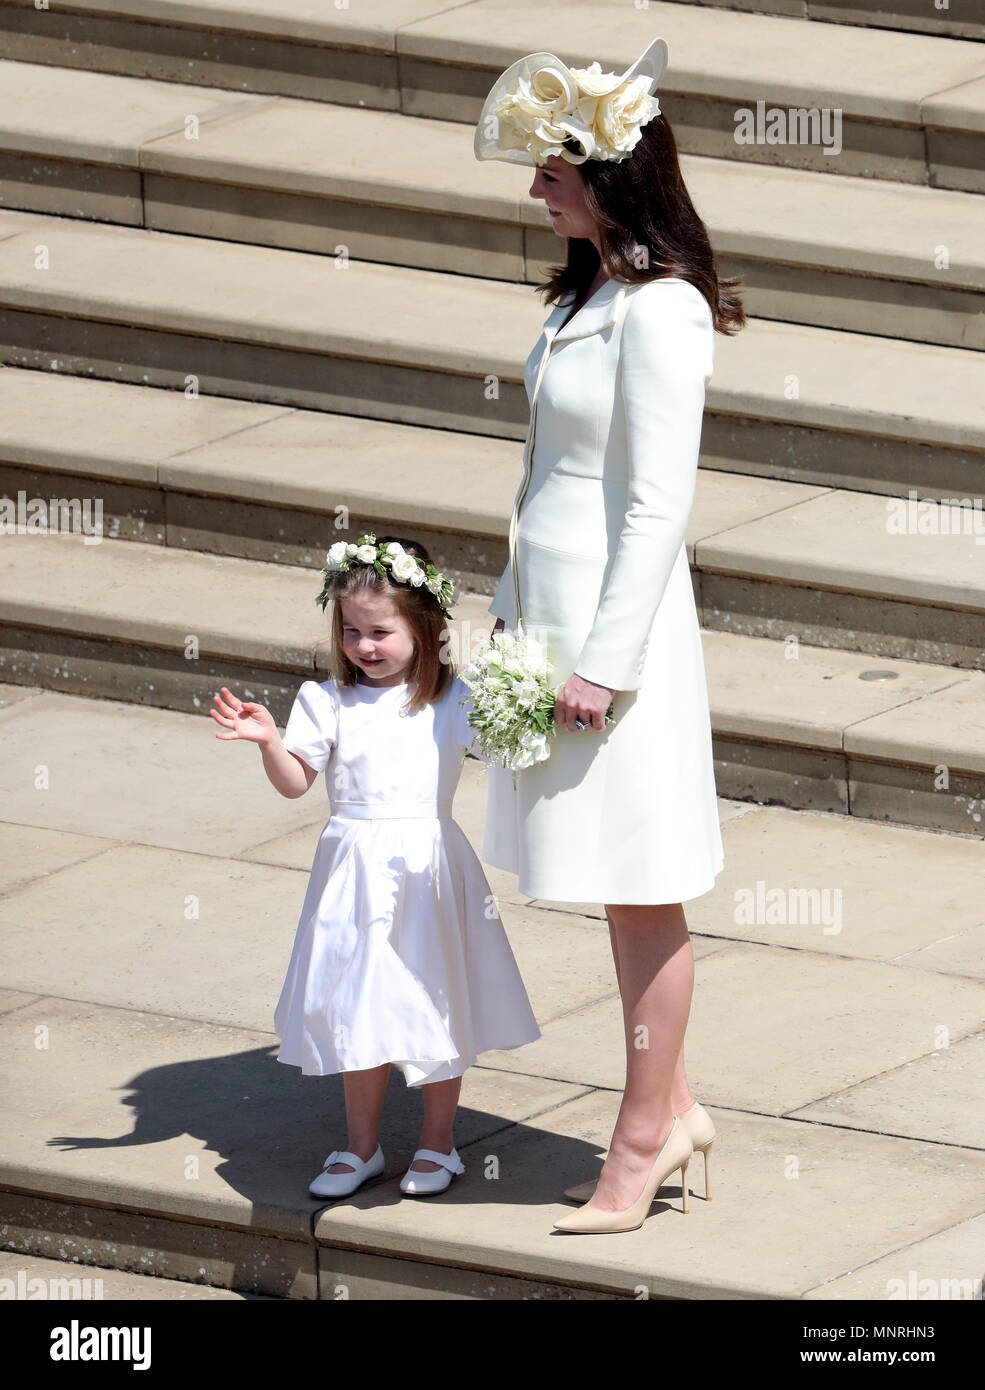 Duchess of Cambridge and Princess Charlotte after the wedding of